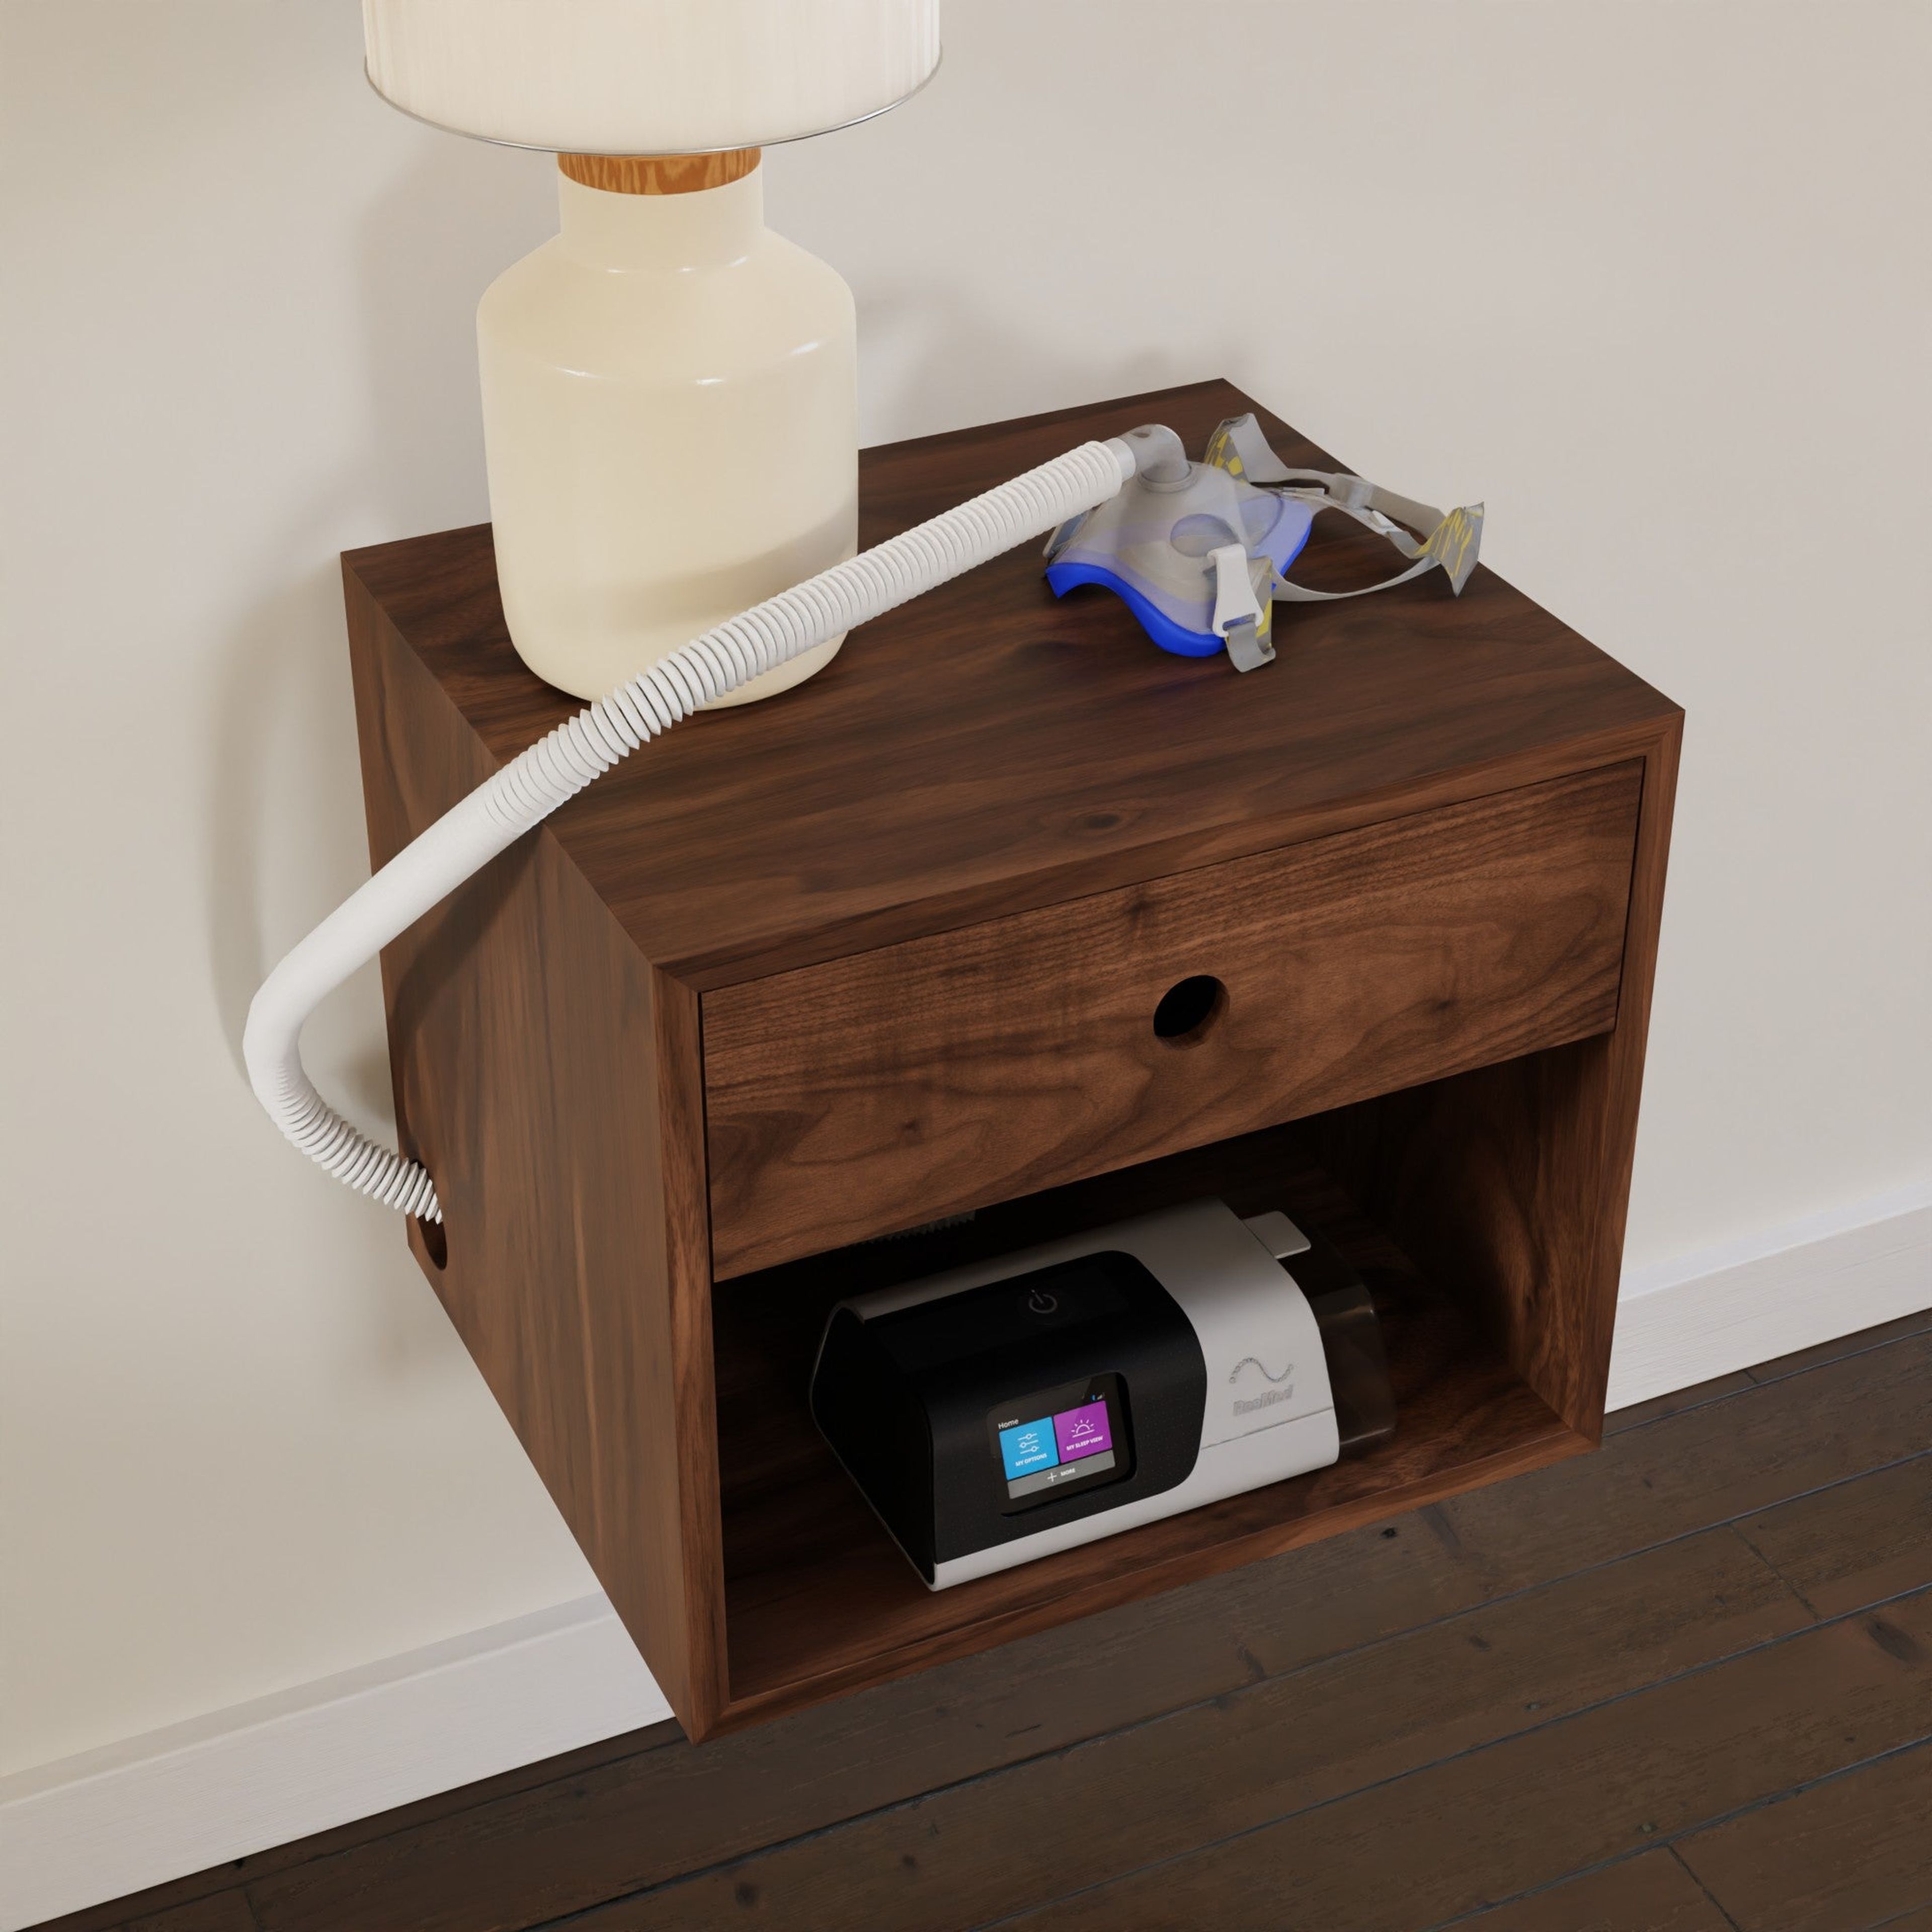 CPAP Floating Nightstand in Solid Walnut